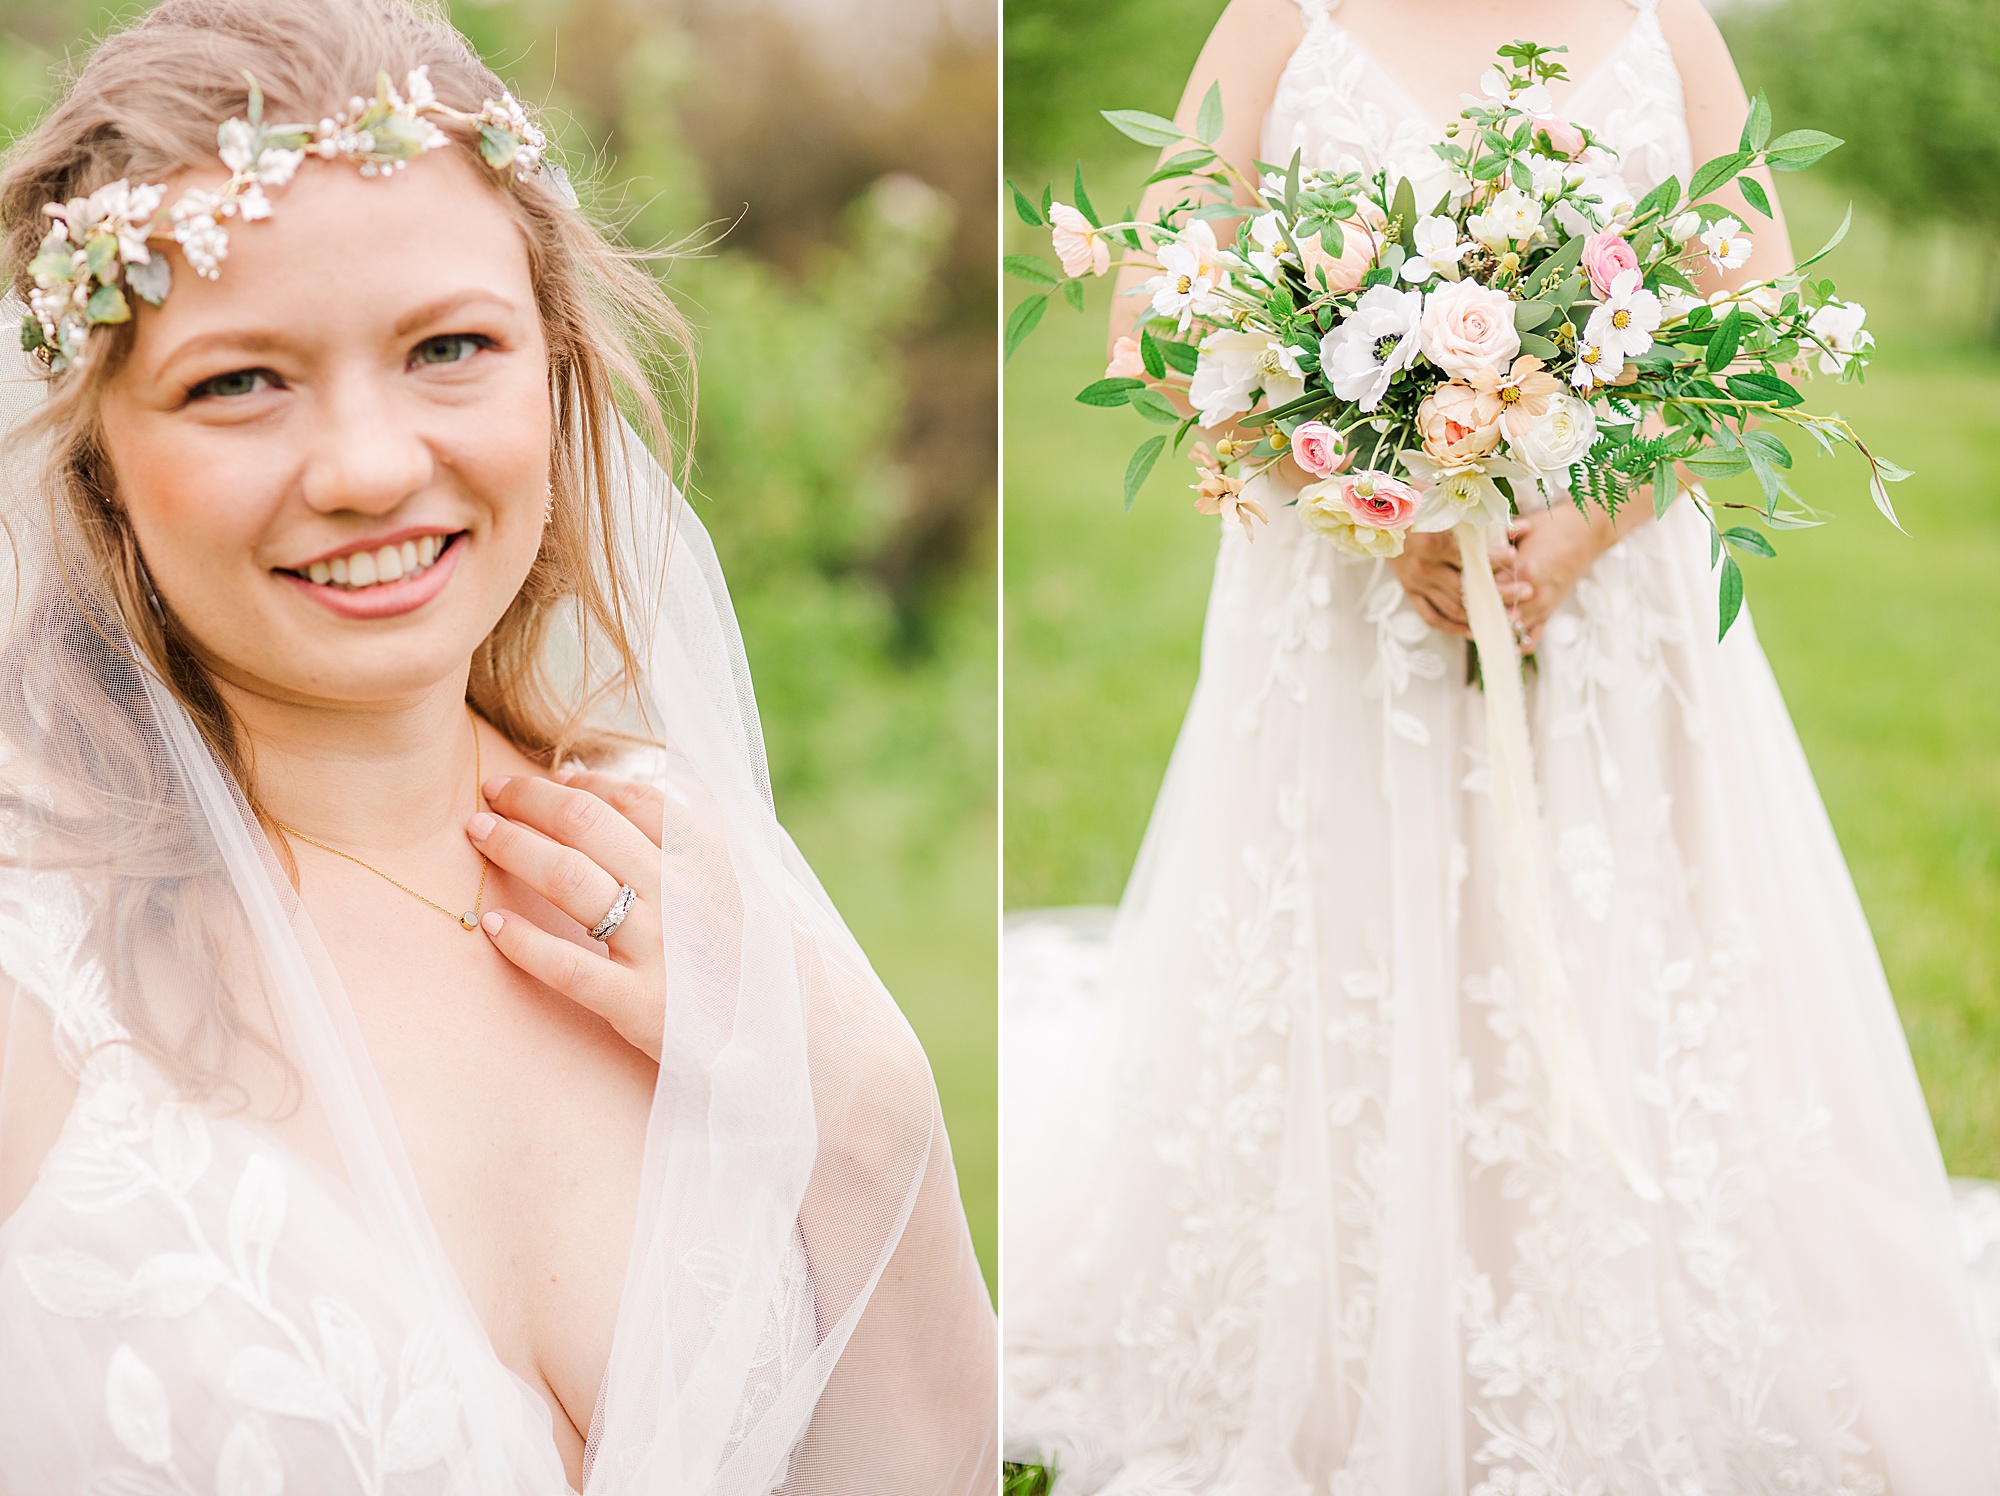 bride's details for intimate wedding day in orchard